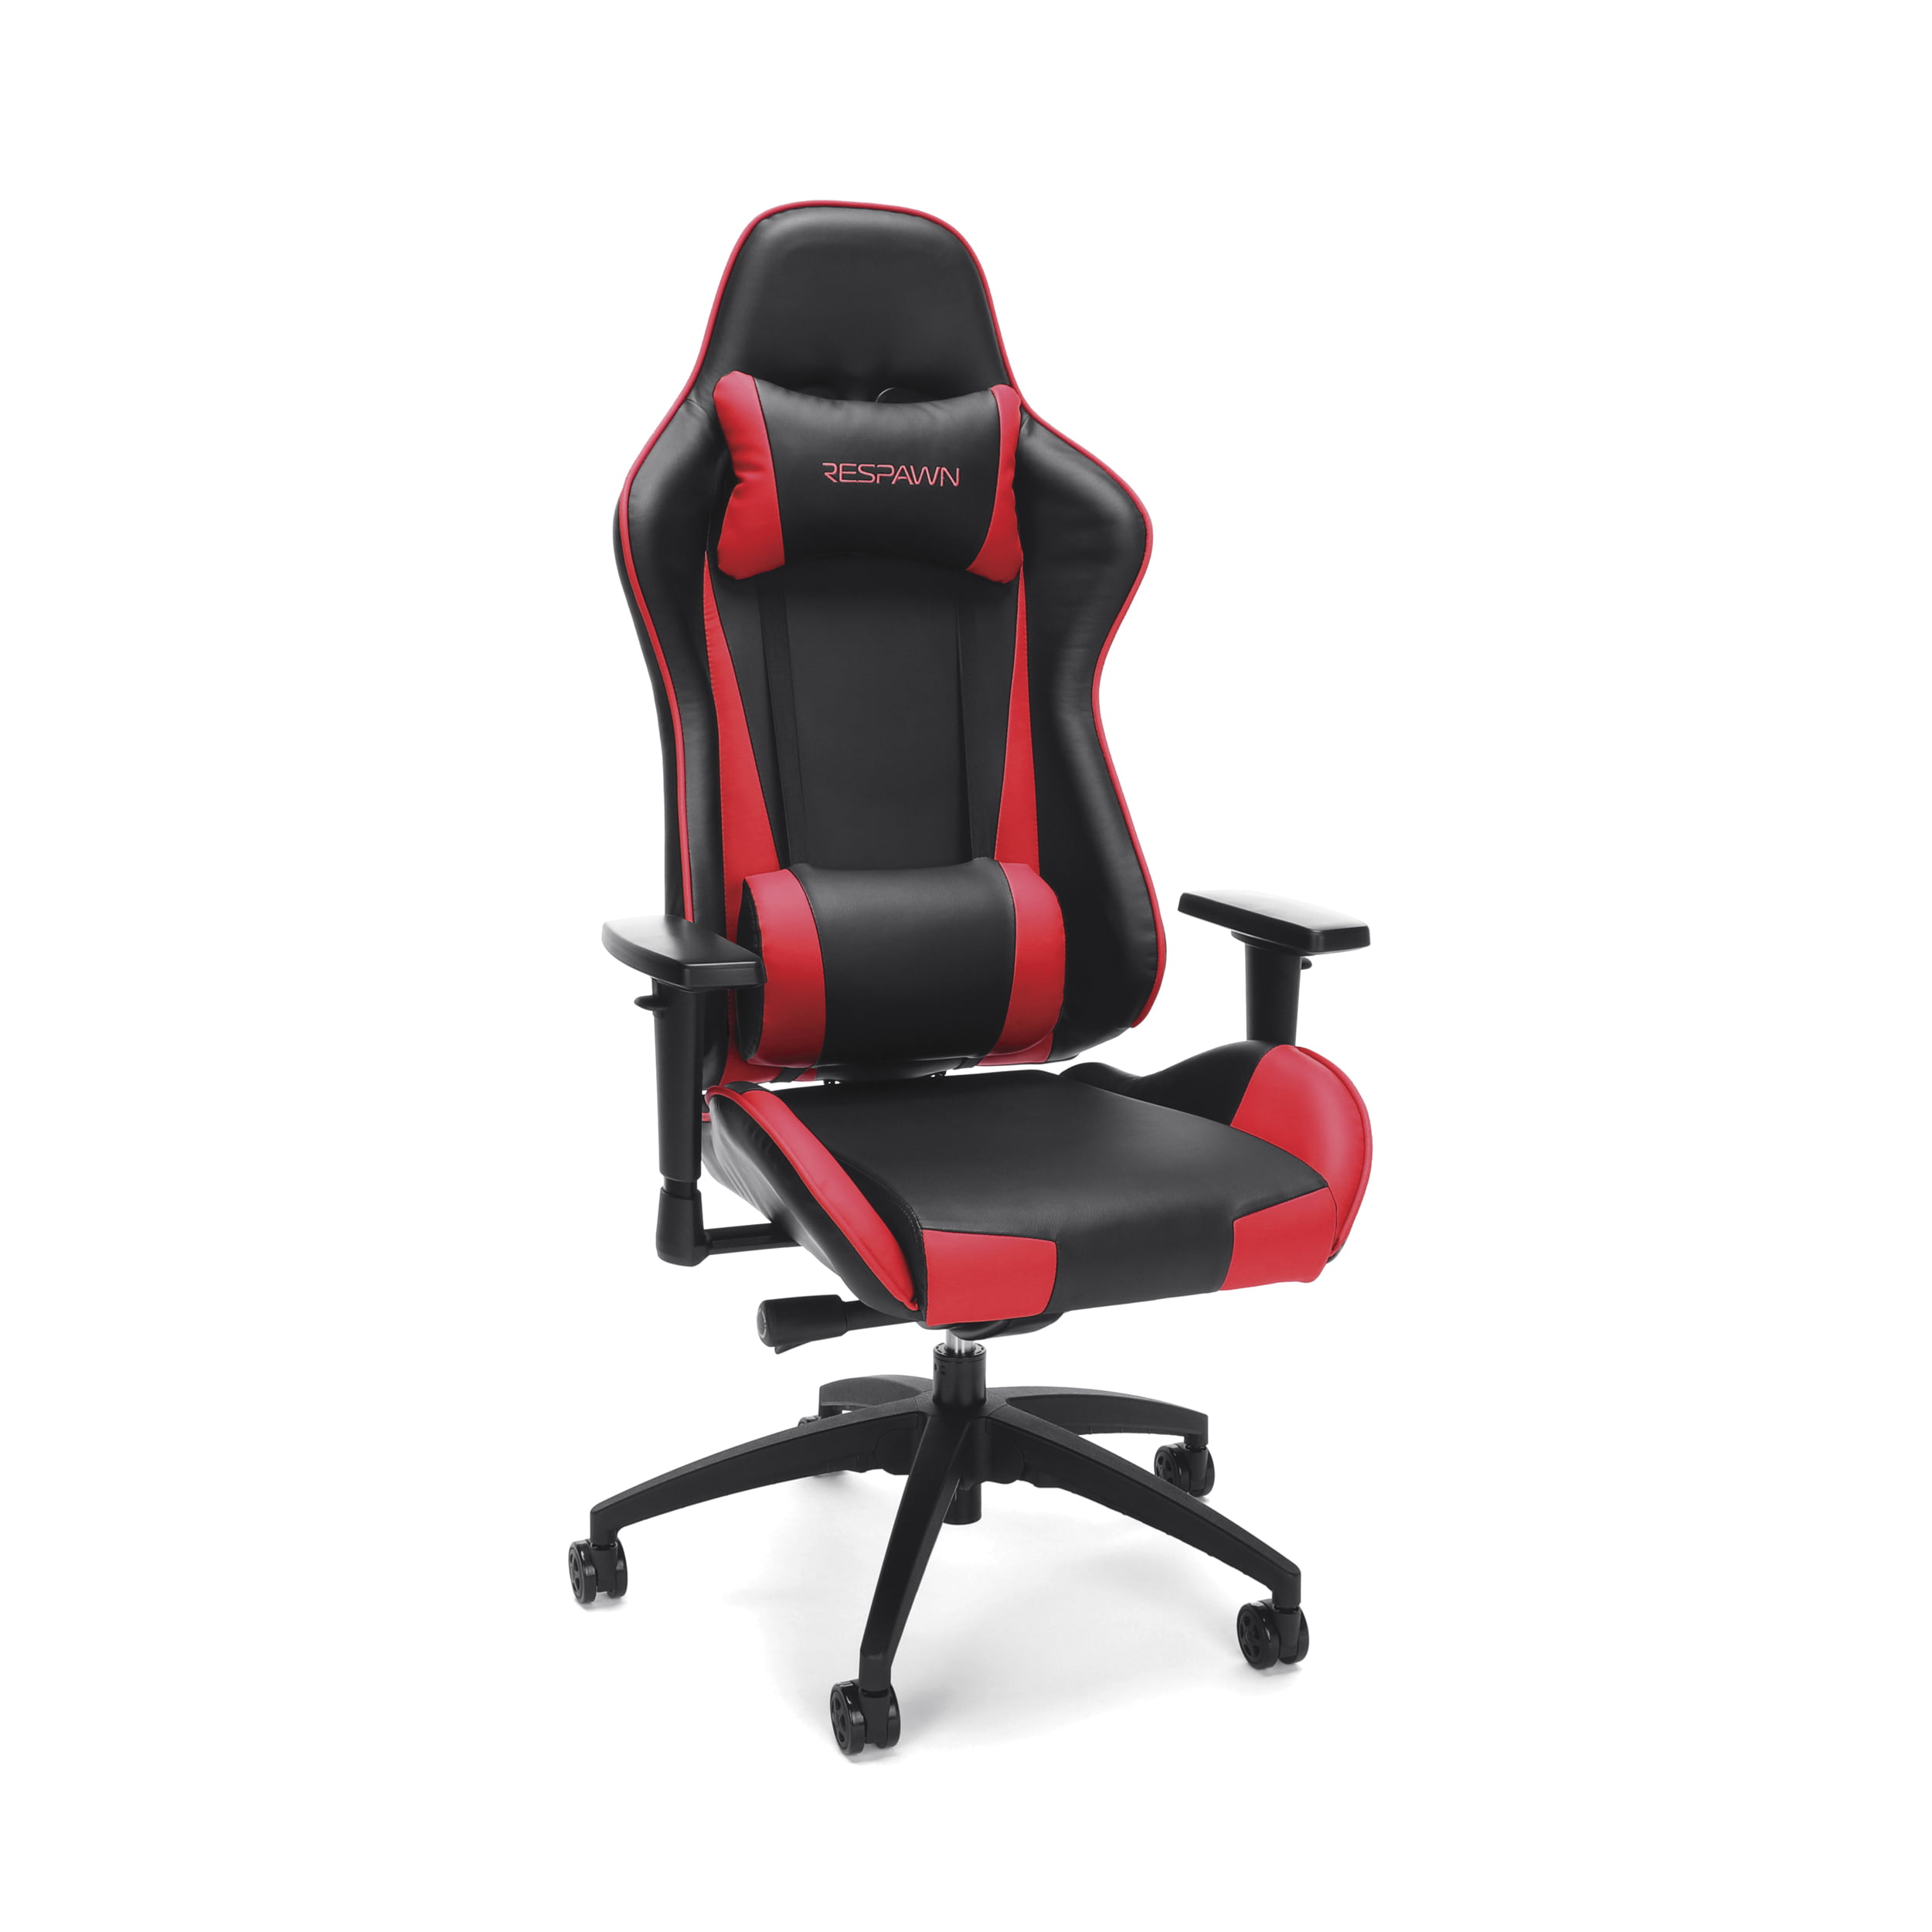 RESPAWN 105 Racing Style Gaming Chair, in Red (RSP105RED